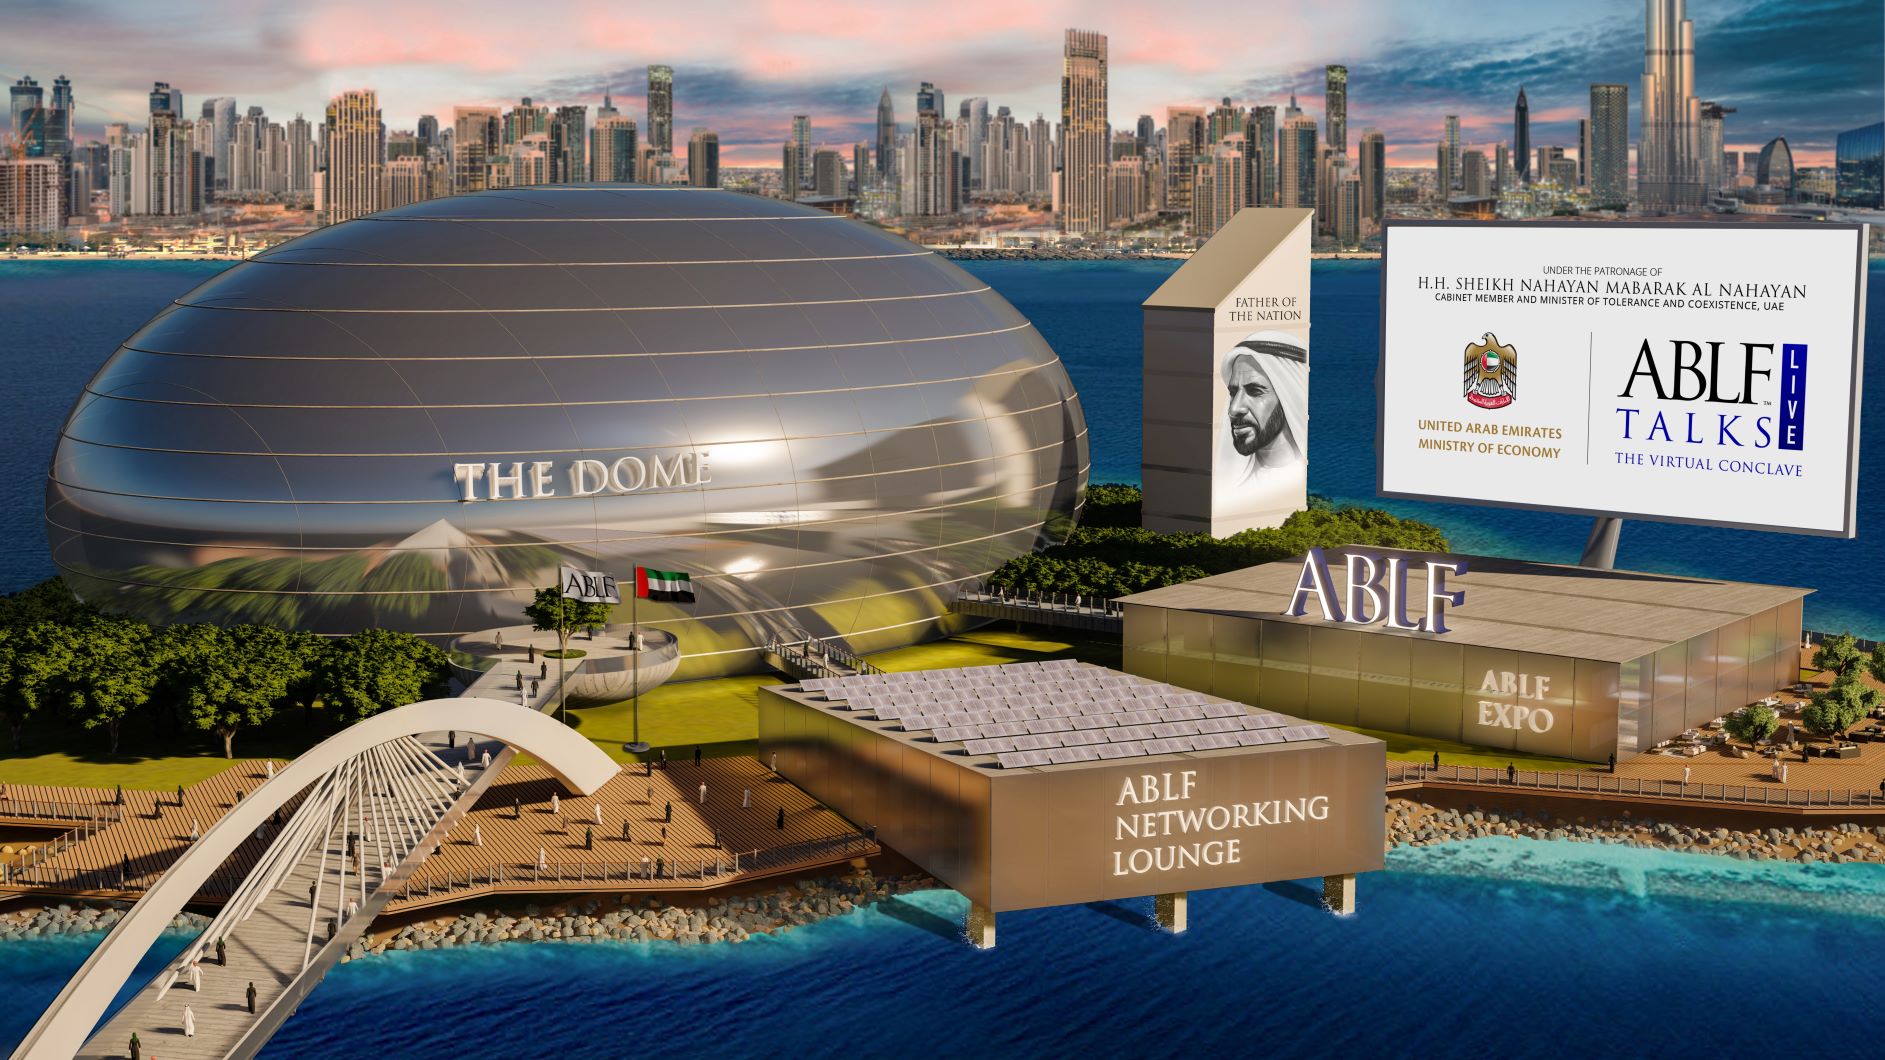 Image for London In Focus At ABLF Talks Live: HE Sadiq Khan, HEMansoorAbulhoul And Business Magnate G.P. Hinduja To Partake In The Third Virtual Conclave Of The ABLF Talks Live